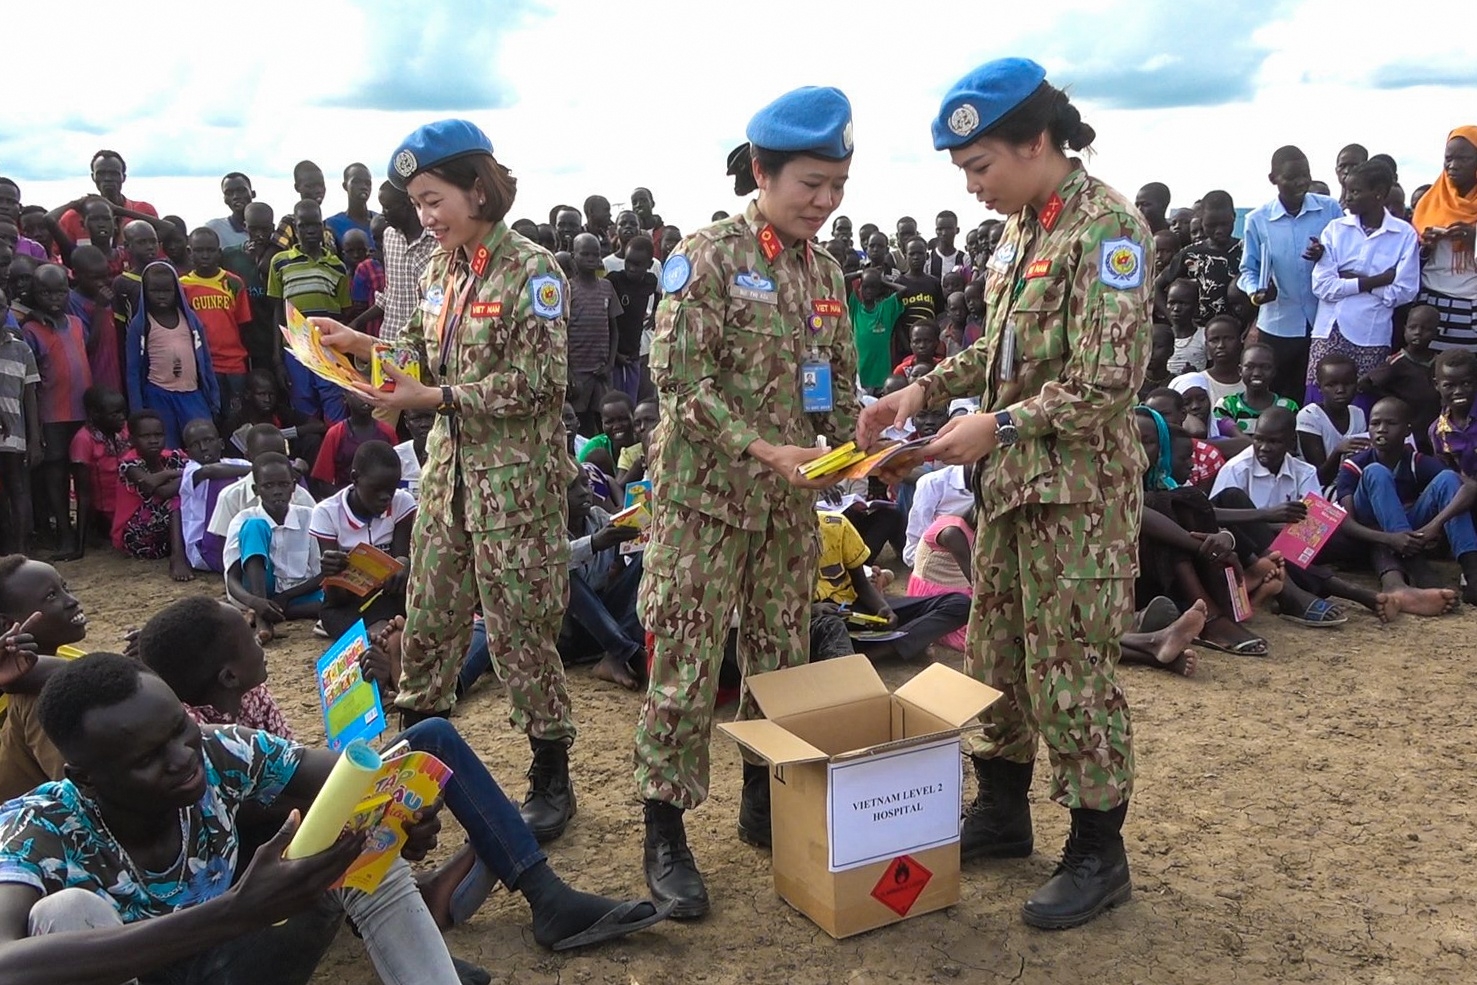 The journey to South Sudan of the 25-year-old Vietnamese female peacekeeper